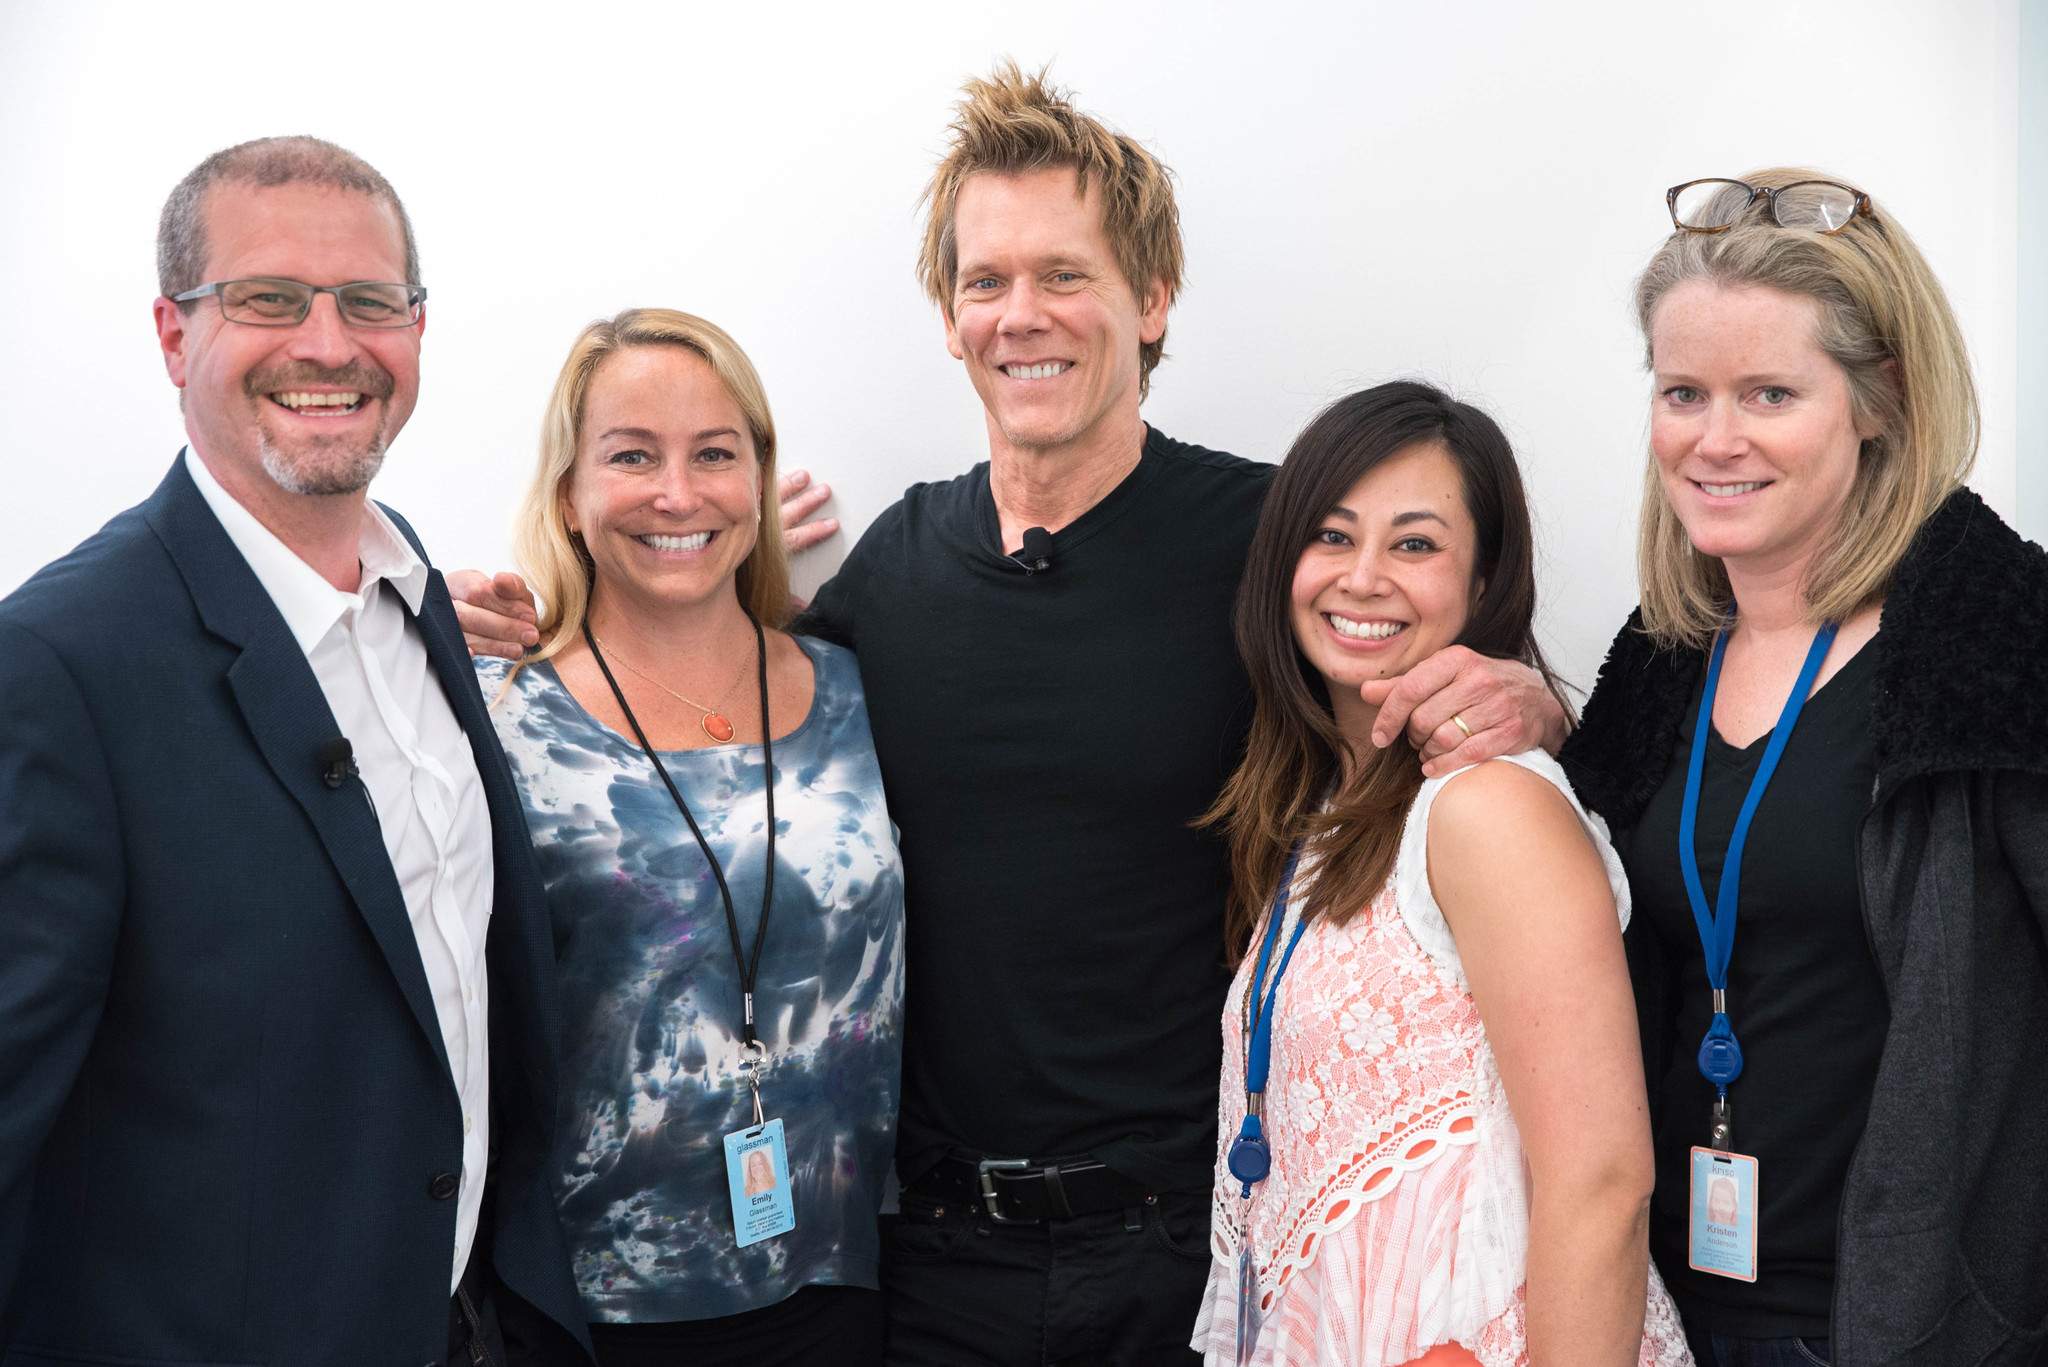 Kevin Bacon at the IMDb/Amazon Fishbowl for 'Cop Car' with Keith Simanton, Emily Glassman, Chako Suzuki, and Kris Anderson